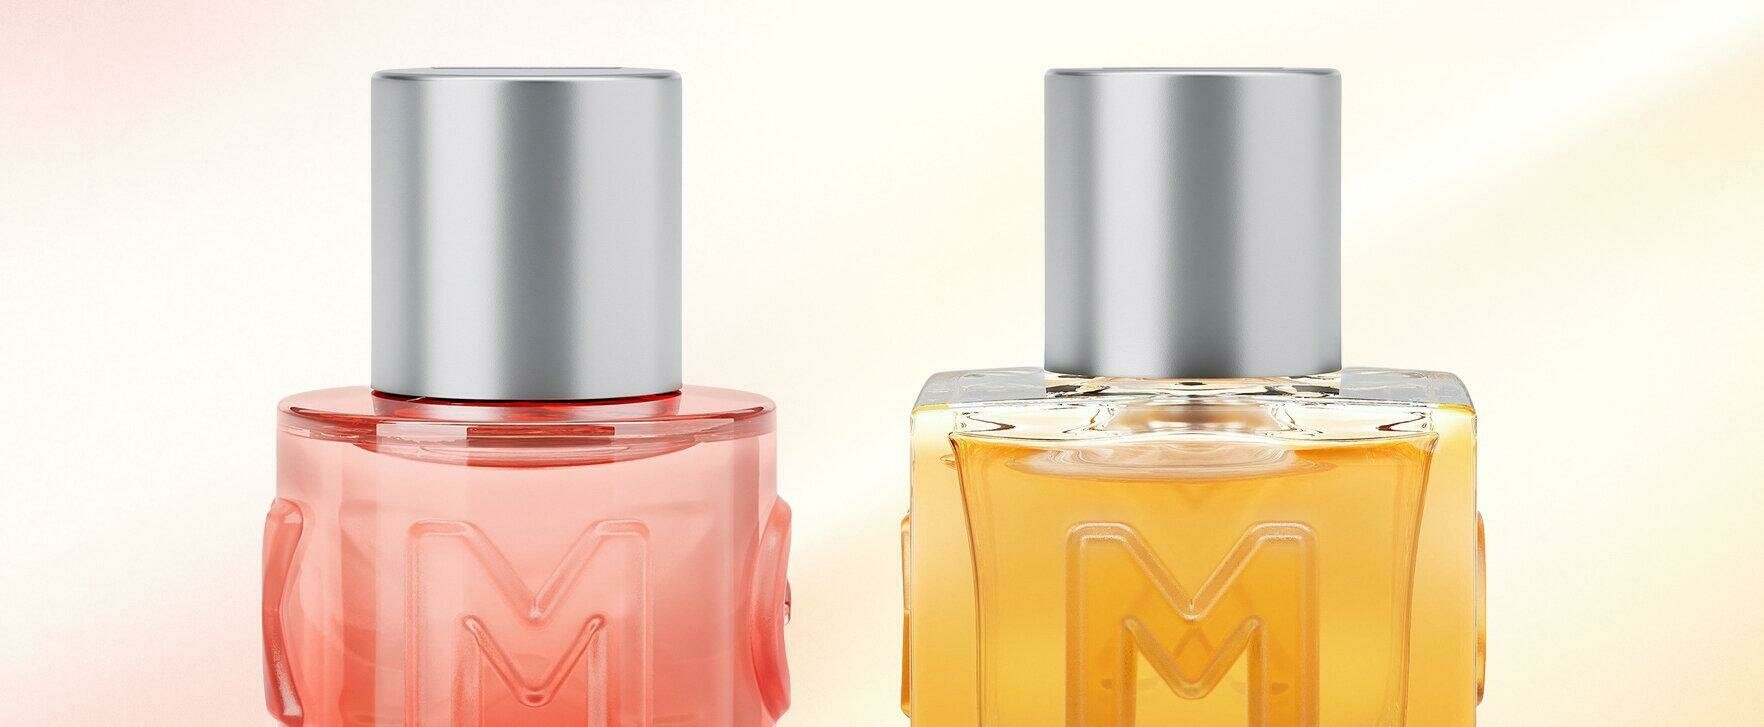 New Summer Fragrances by Mexx: "Summer Bliss for Her" and "Summer Bliss for Him"